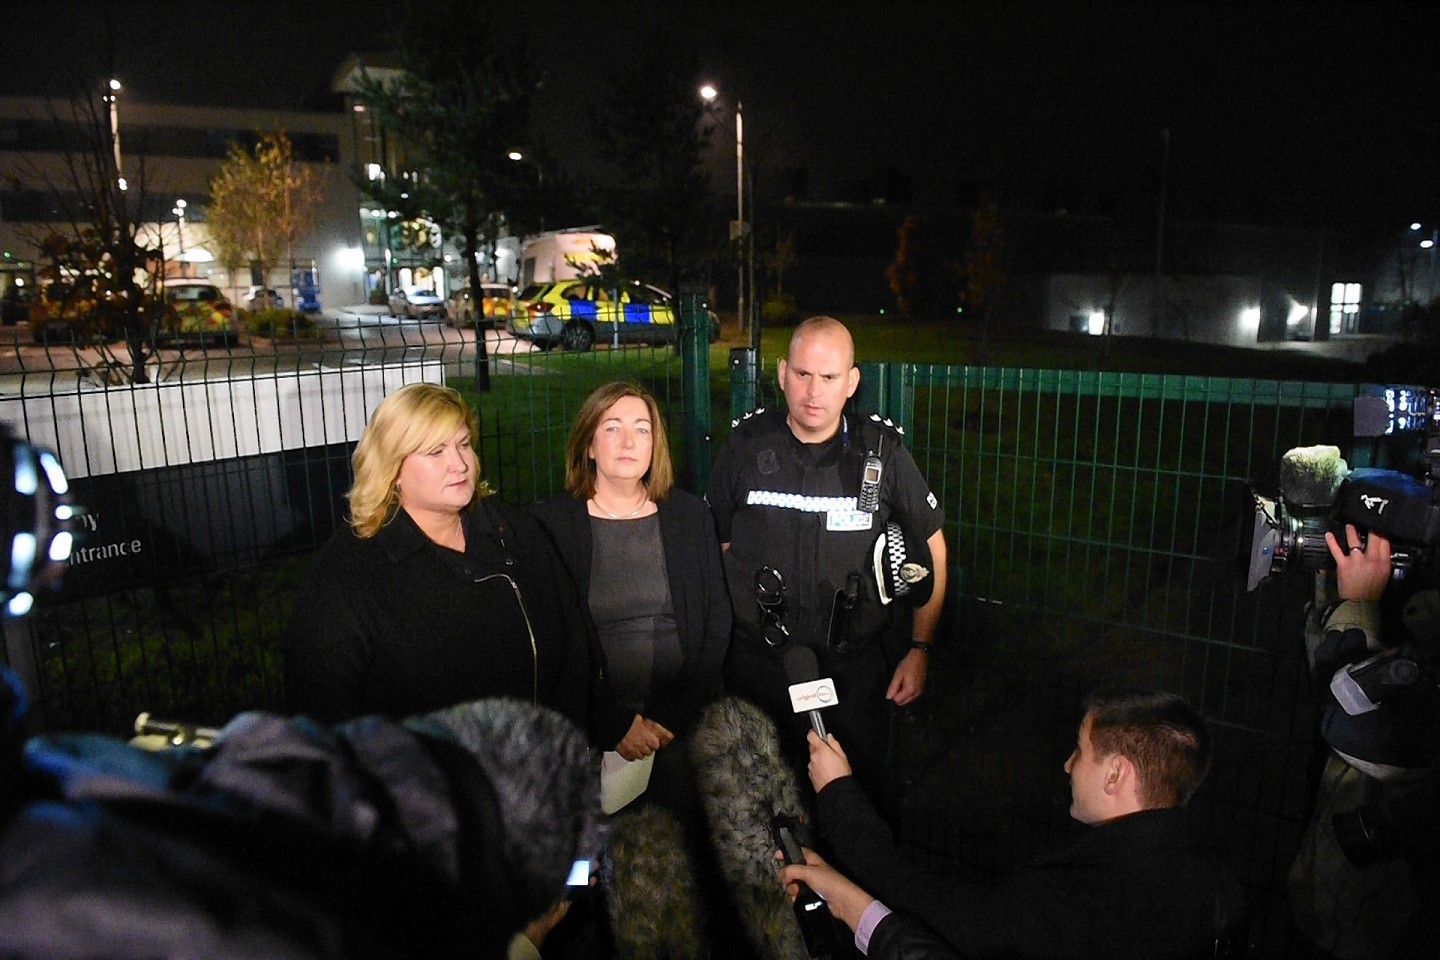 While headteacher Anna Muirhead, Chief Inspector Graeme Mackie and Aberdeen City Council's Gail Gorman briefed the press on the tragedy